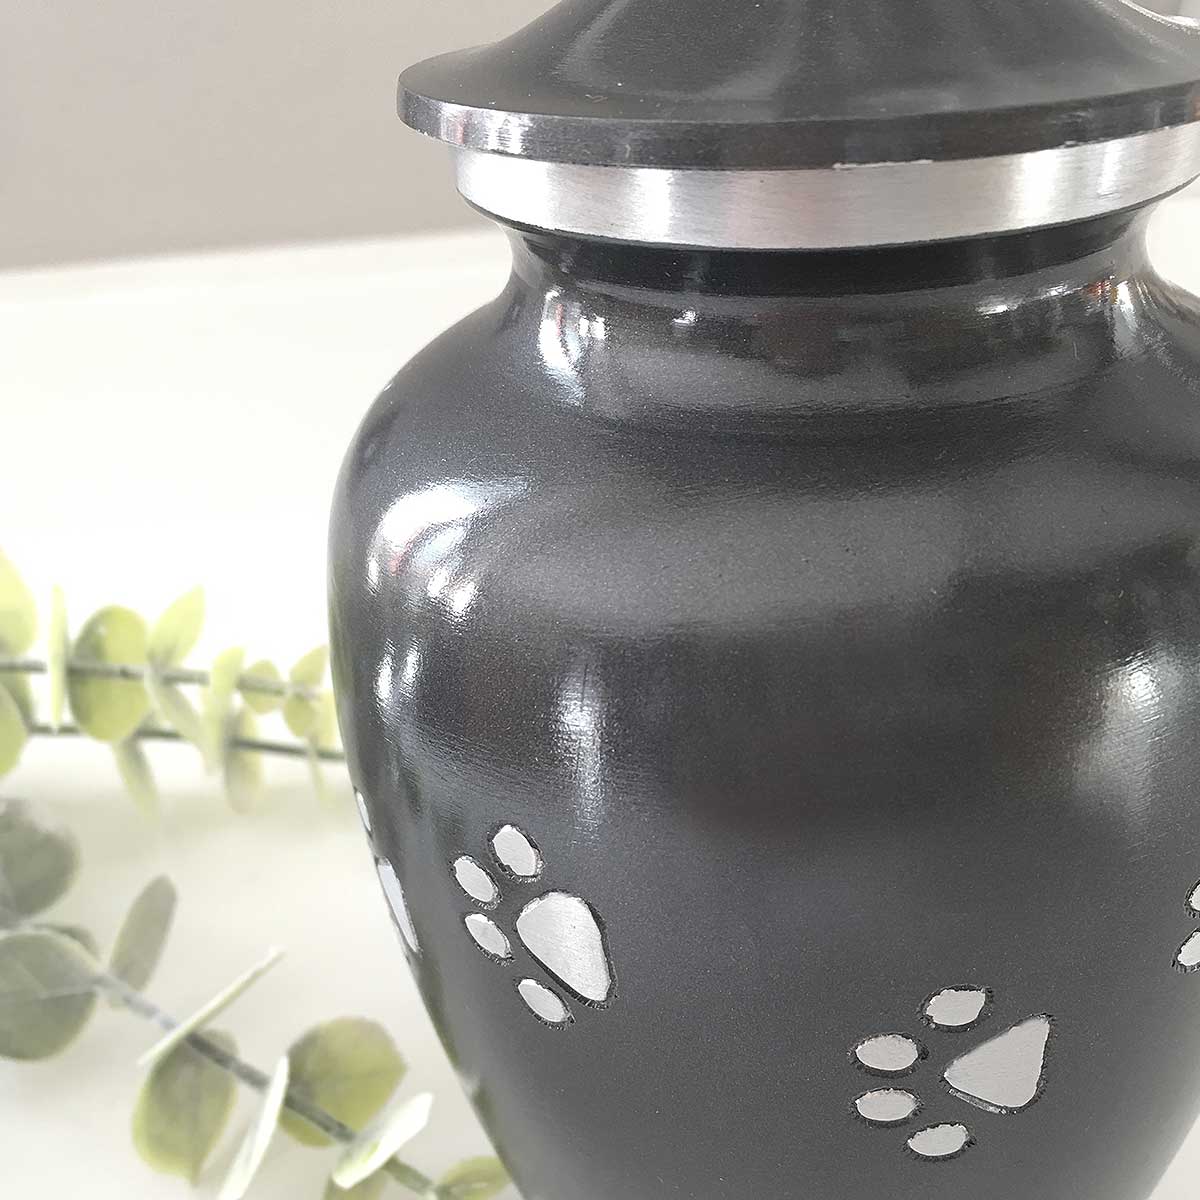 Black/Silver Paw Pet Cremation Urn for Ashes